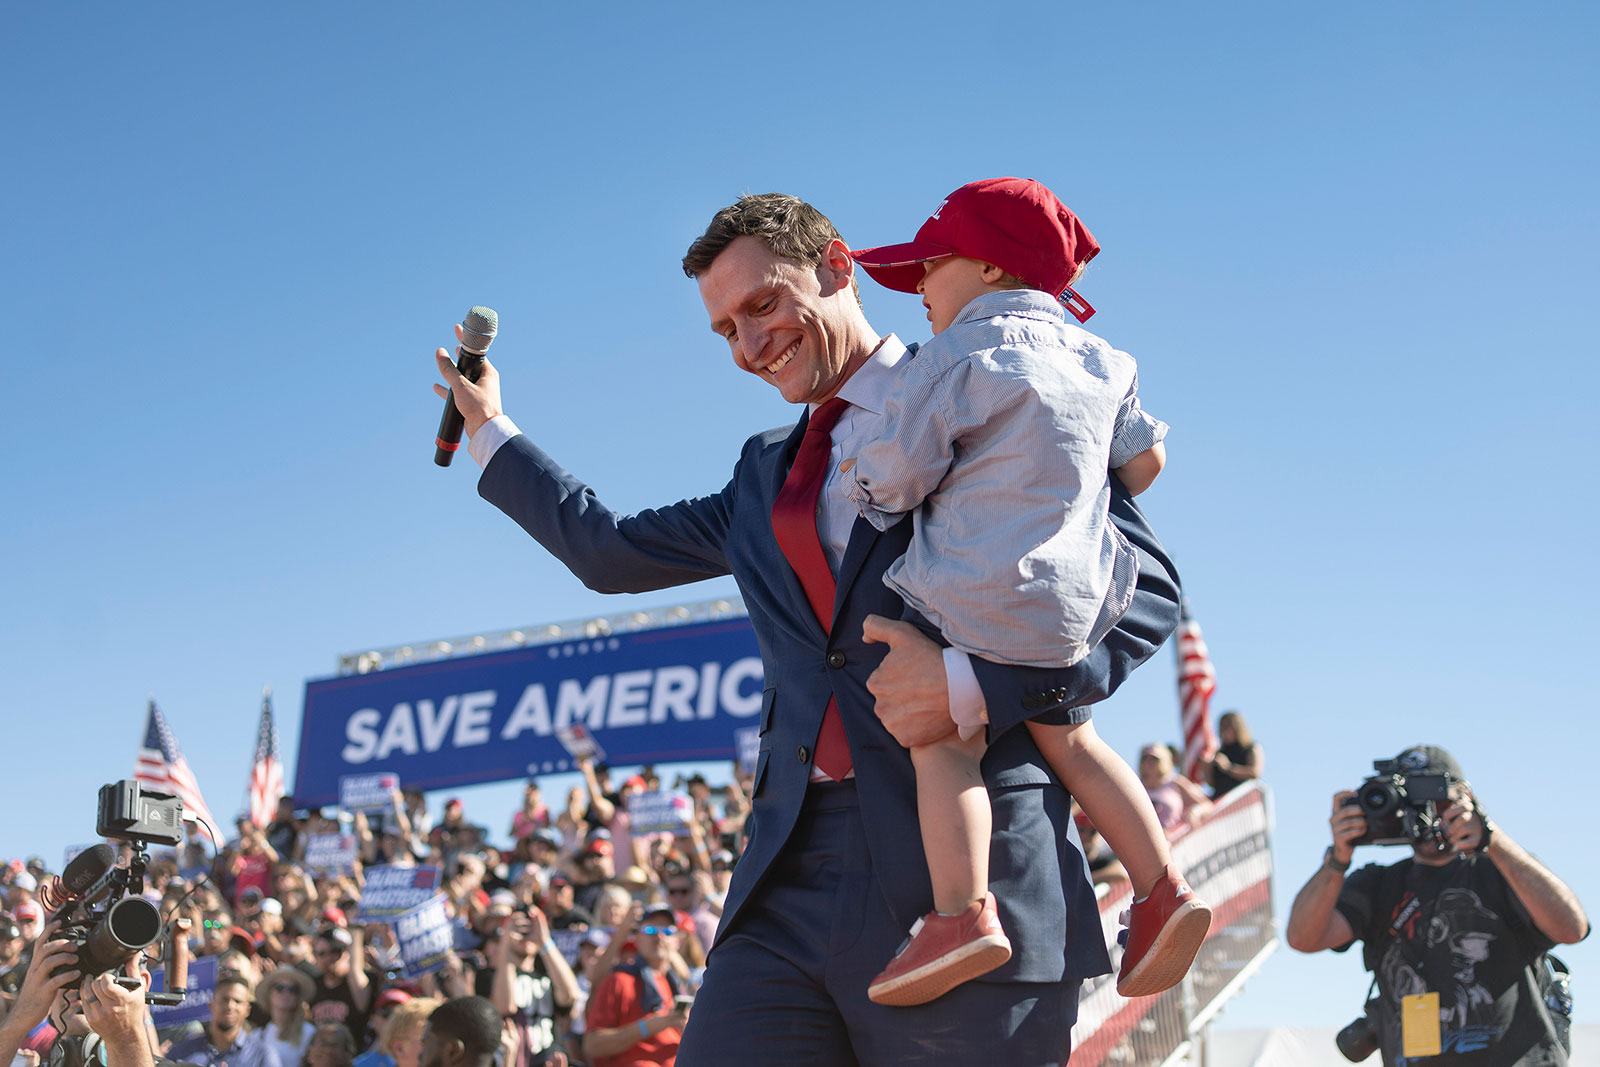 Blake Masters, Arizona's Republican nominee for senator, appears at a rally headlined by former President Donald Trump in Mesa, Arizona, on Oct. 9.